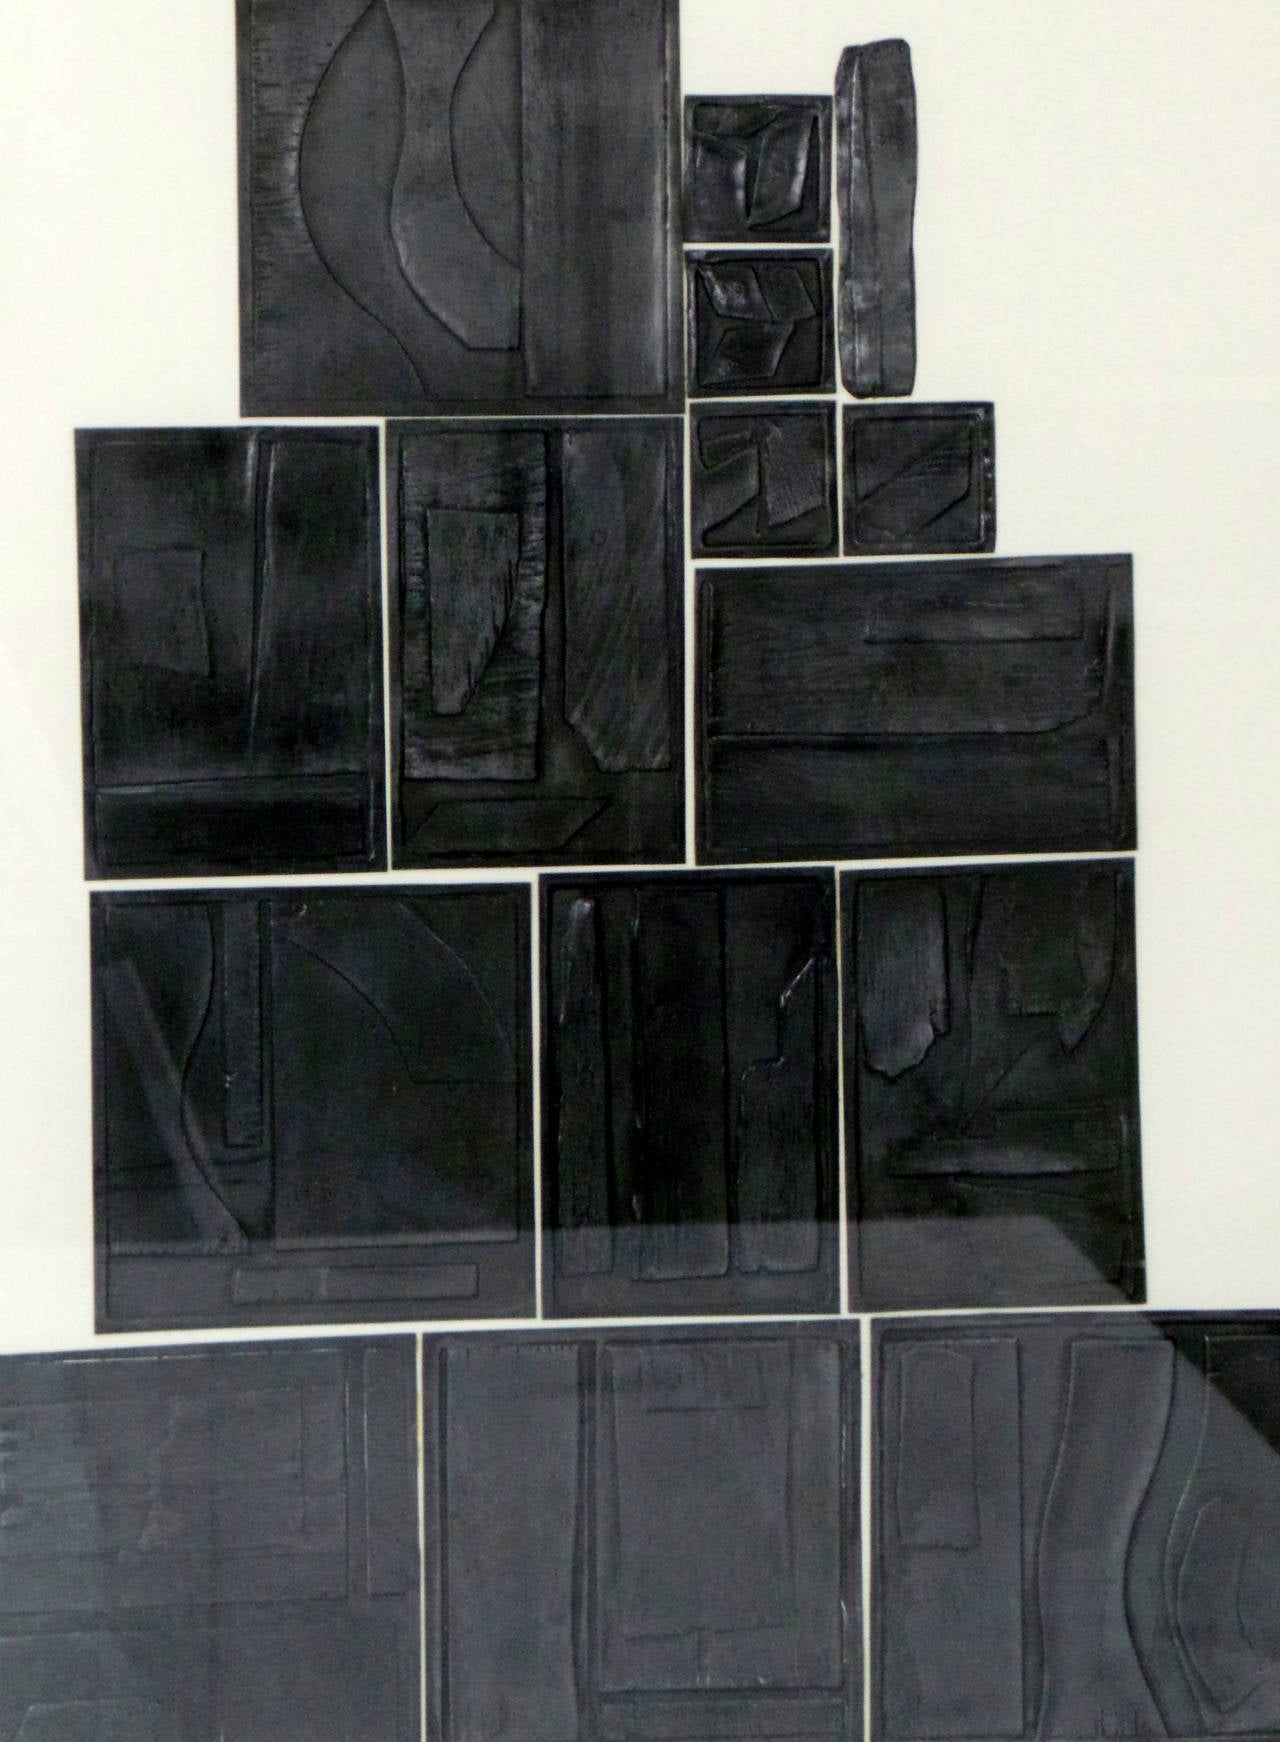 Louise Nevelson 1899–1988) Embossed lead collage on very heavy paper. Signed, titled, dated 1970 and numbered 58/150. Excellent condition, archivally matted and framed with no blemishes. Image 27 1/2 in x 22 in, Frame 40 in x 34 3/4 in.

Ms.